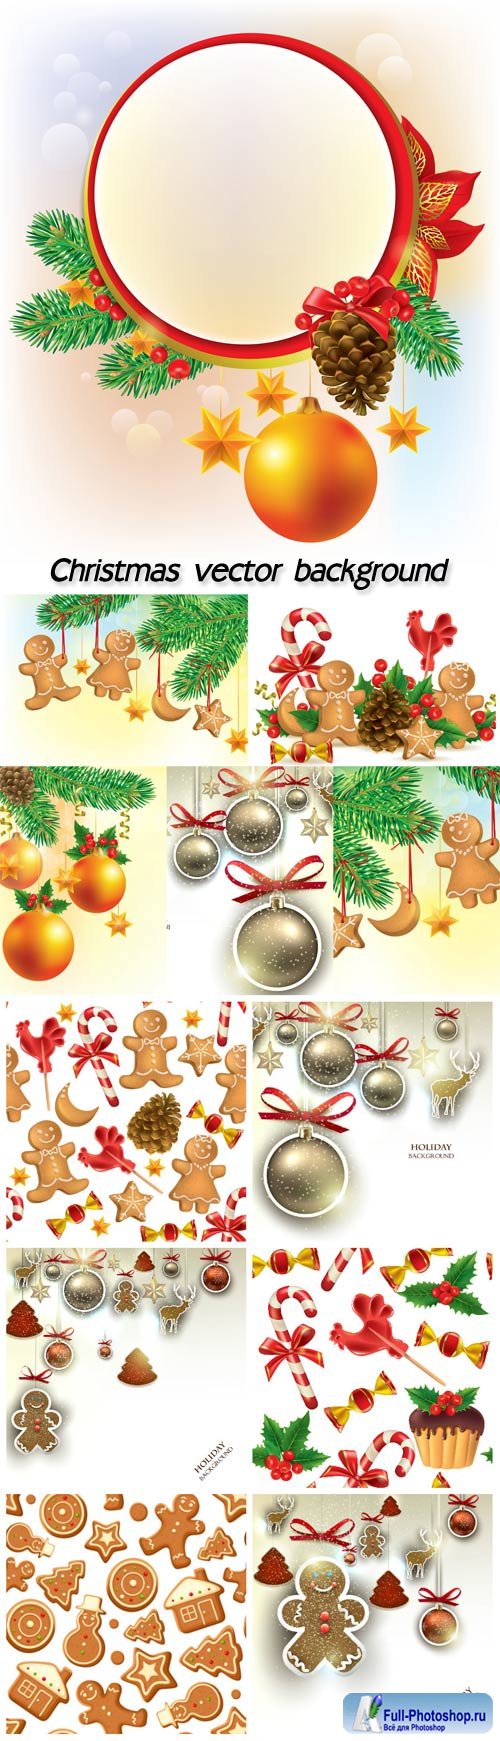 Christmas vector set of Christmas tree with decorations